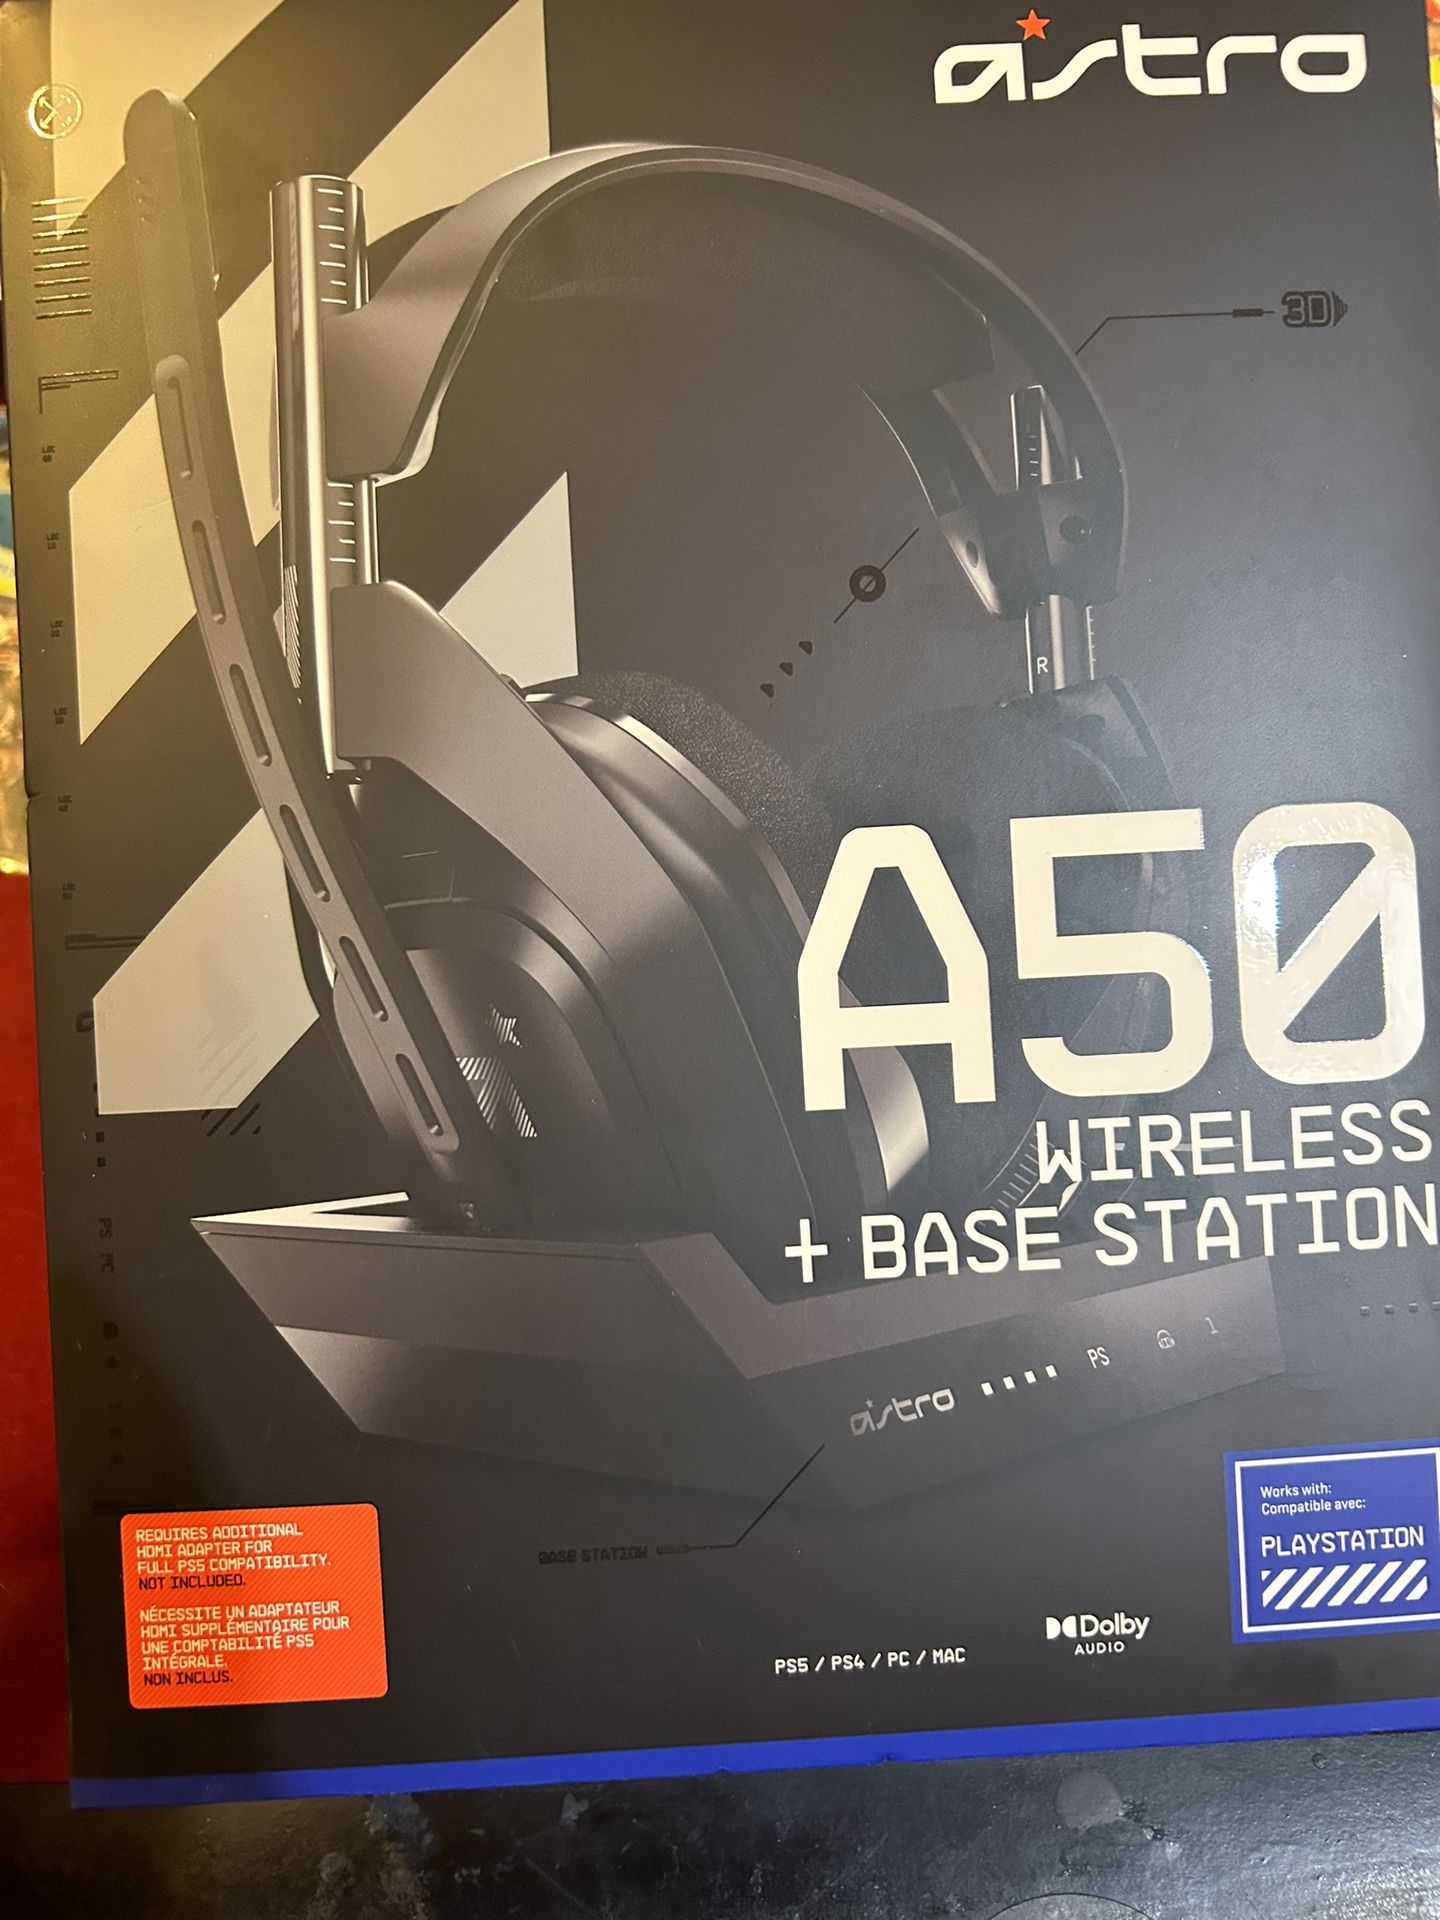 A50 Wireless Gaming Headset (NEW)